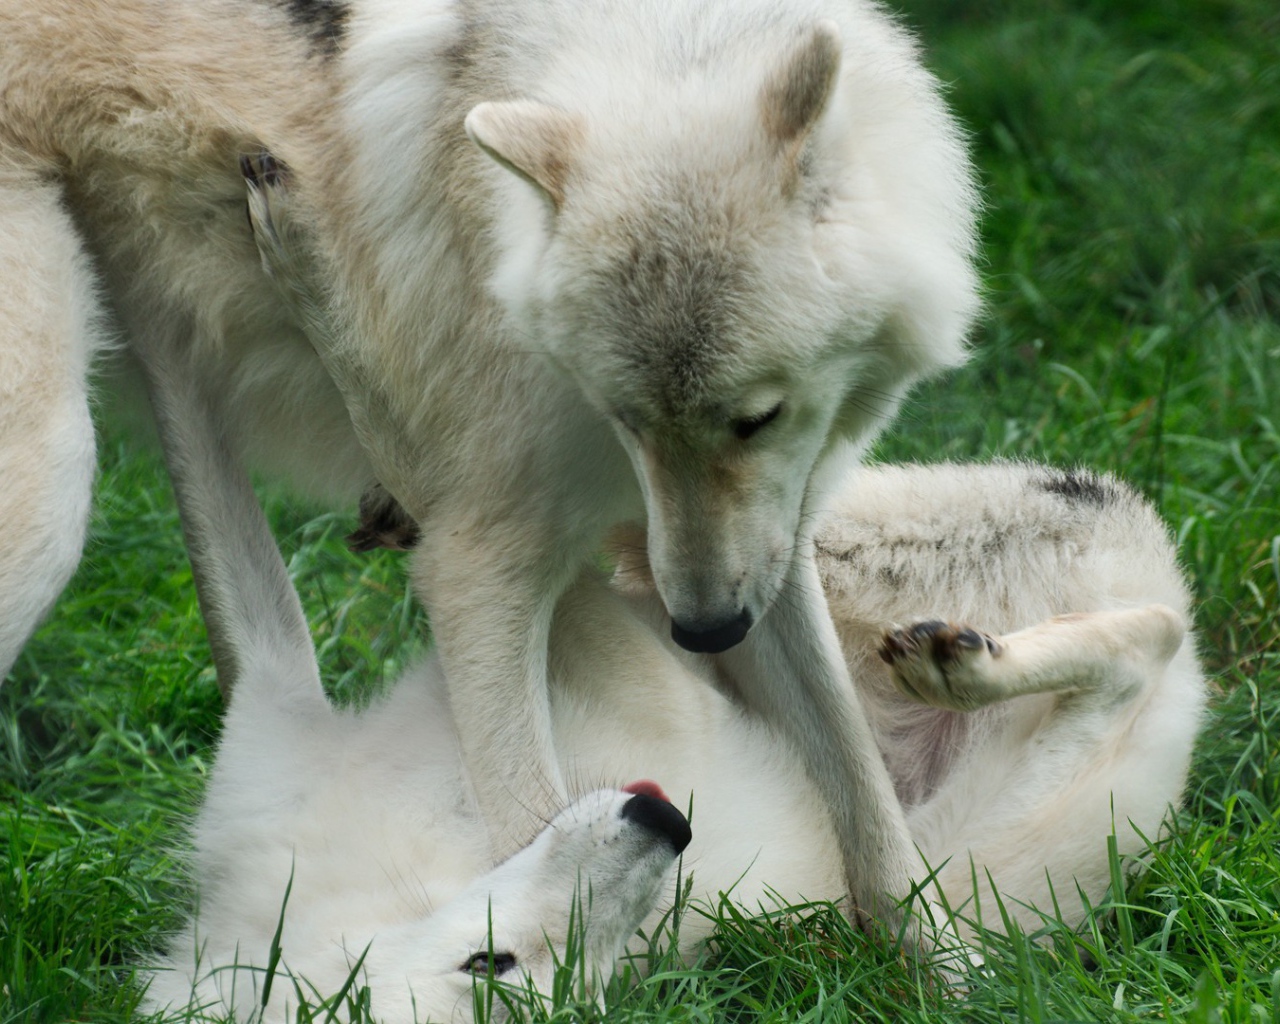 Wolves play on grass